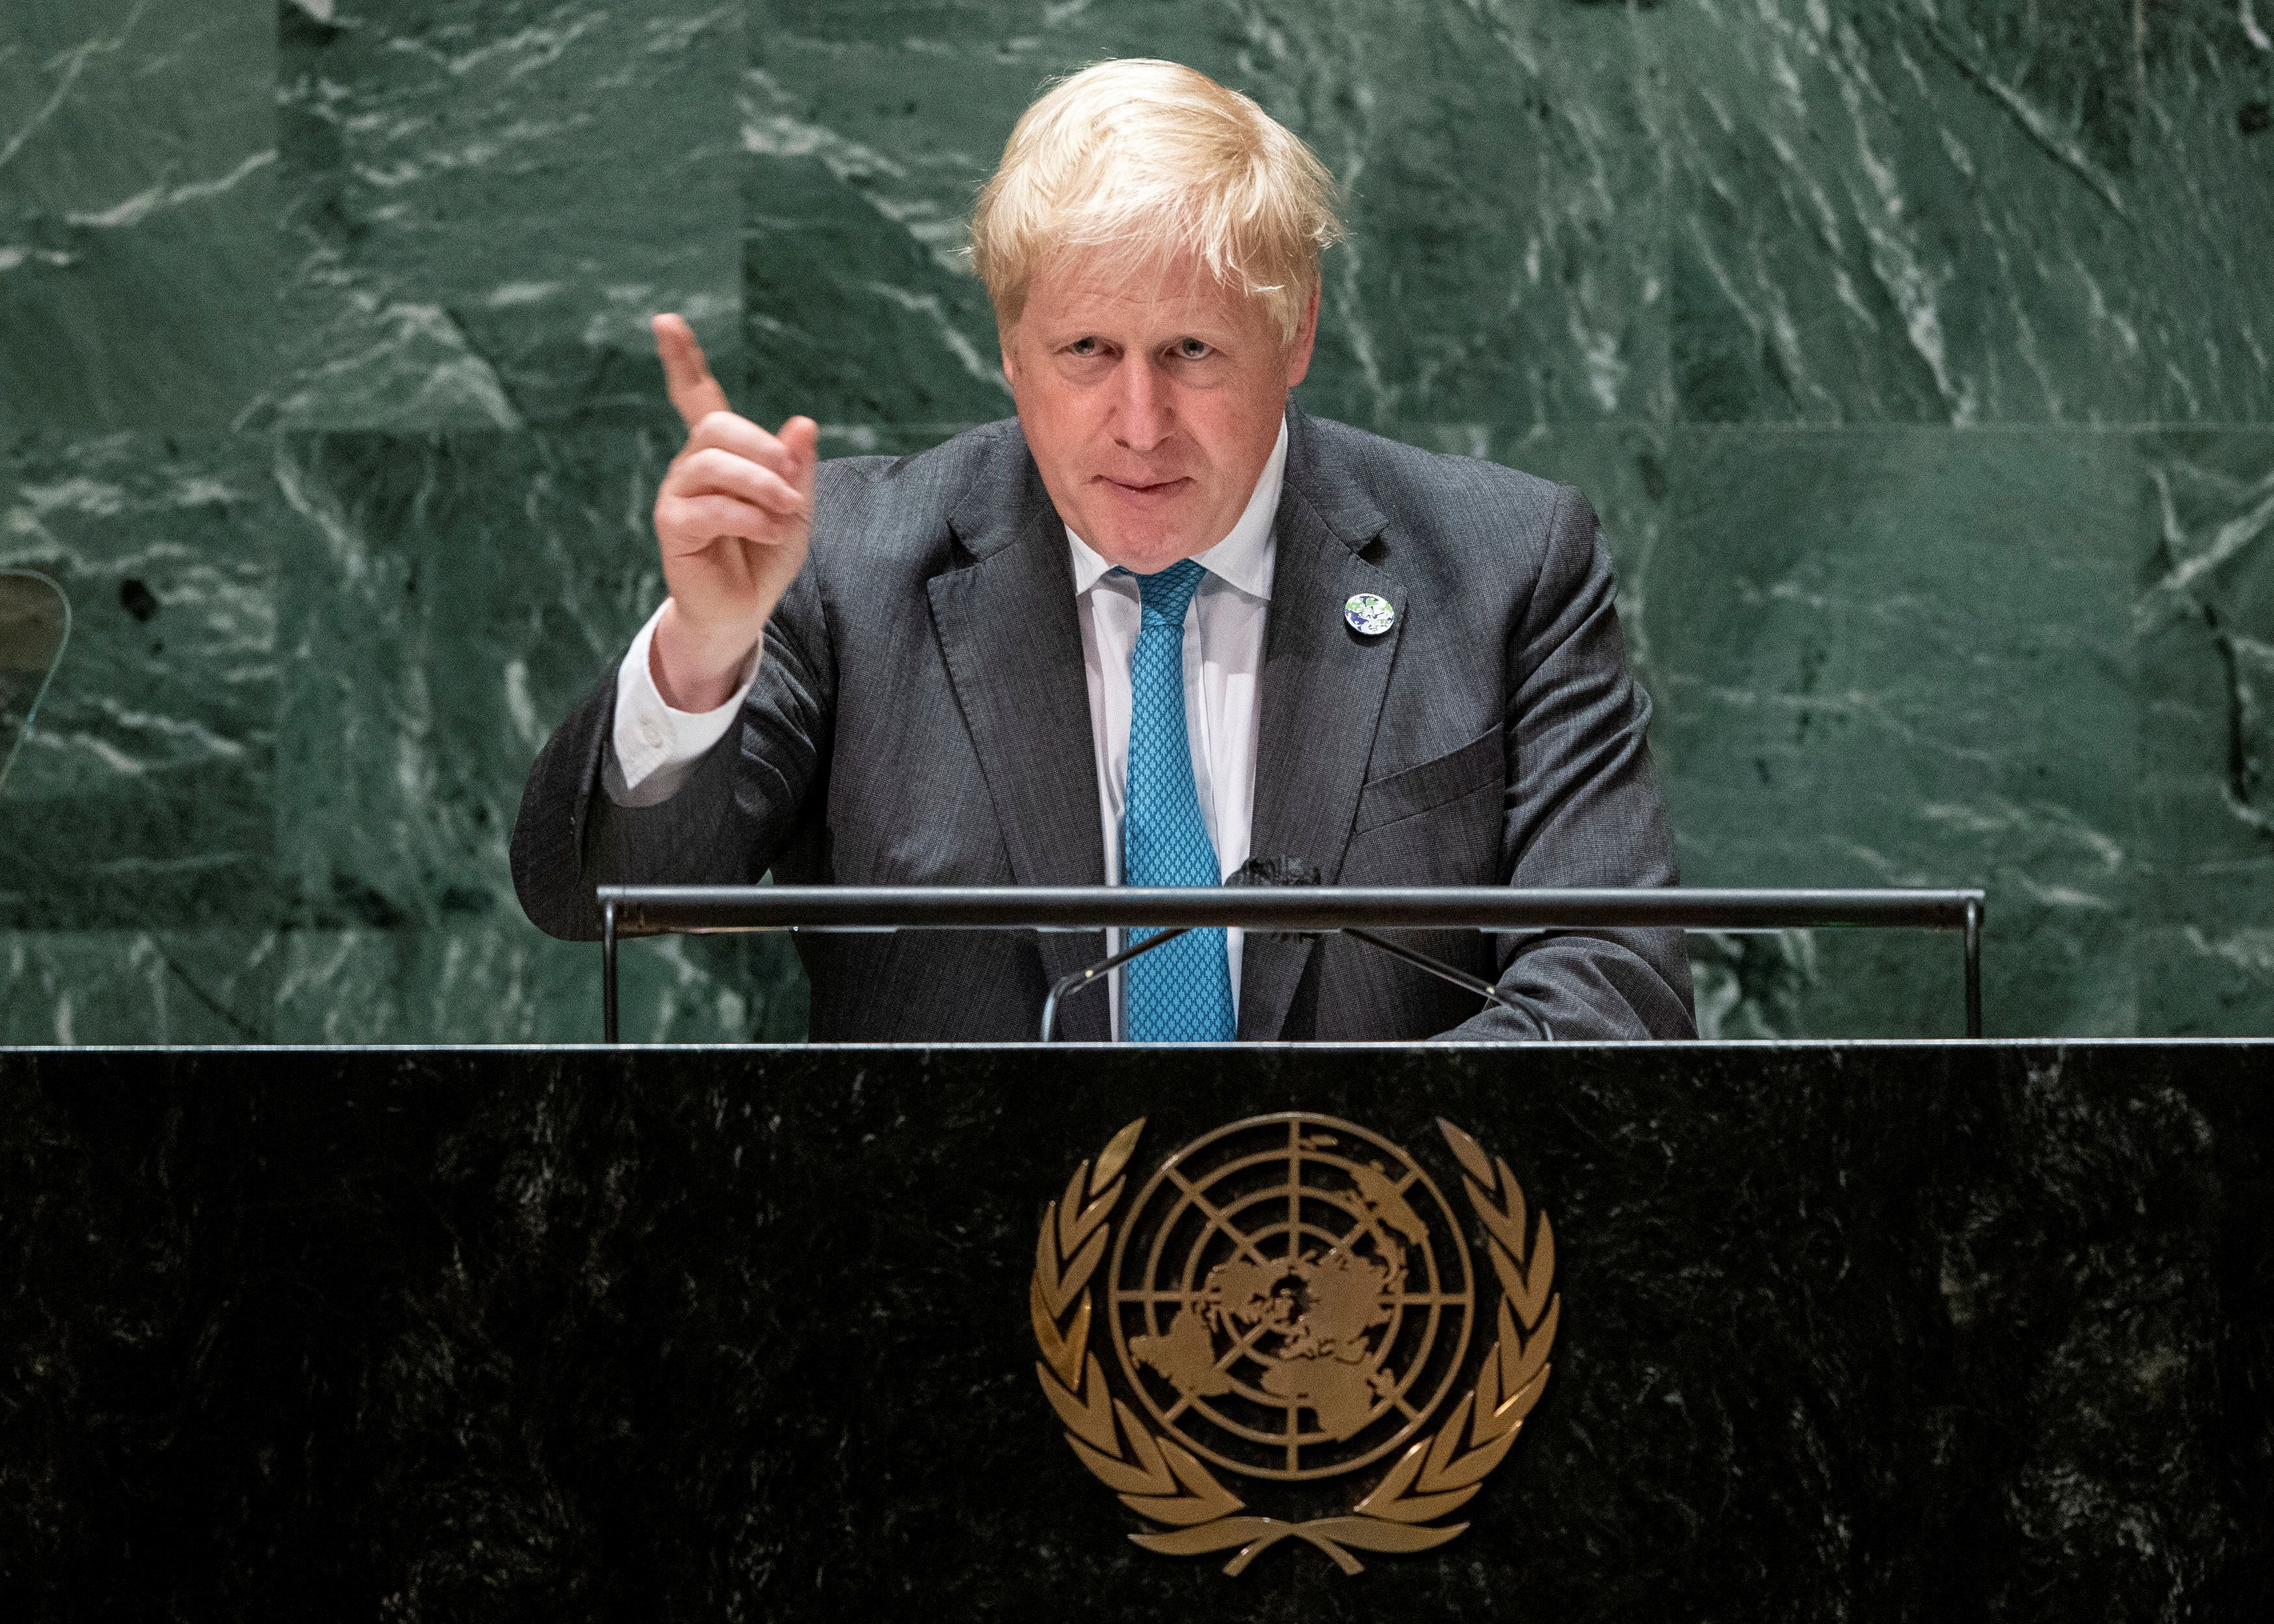 British Prime Minister Boris Johnson addresses the 76th Session of the U.N. General Assembly in New York City